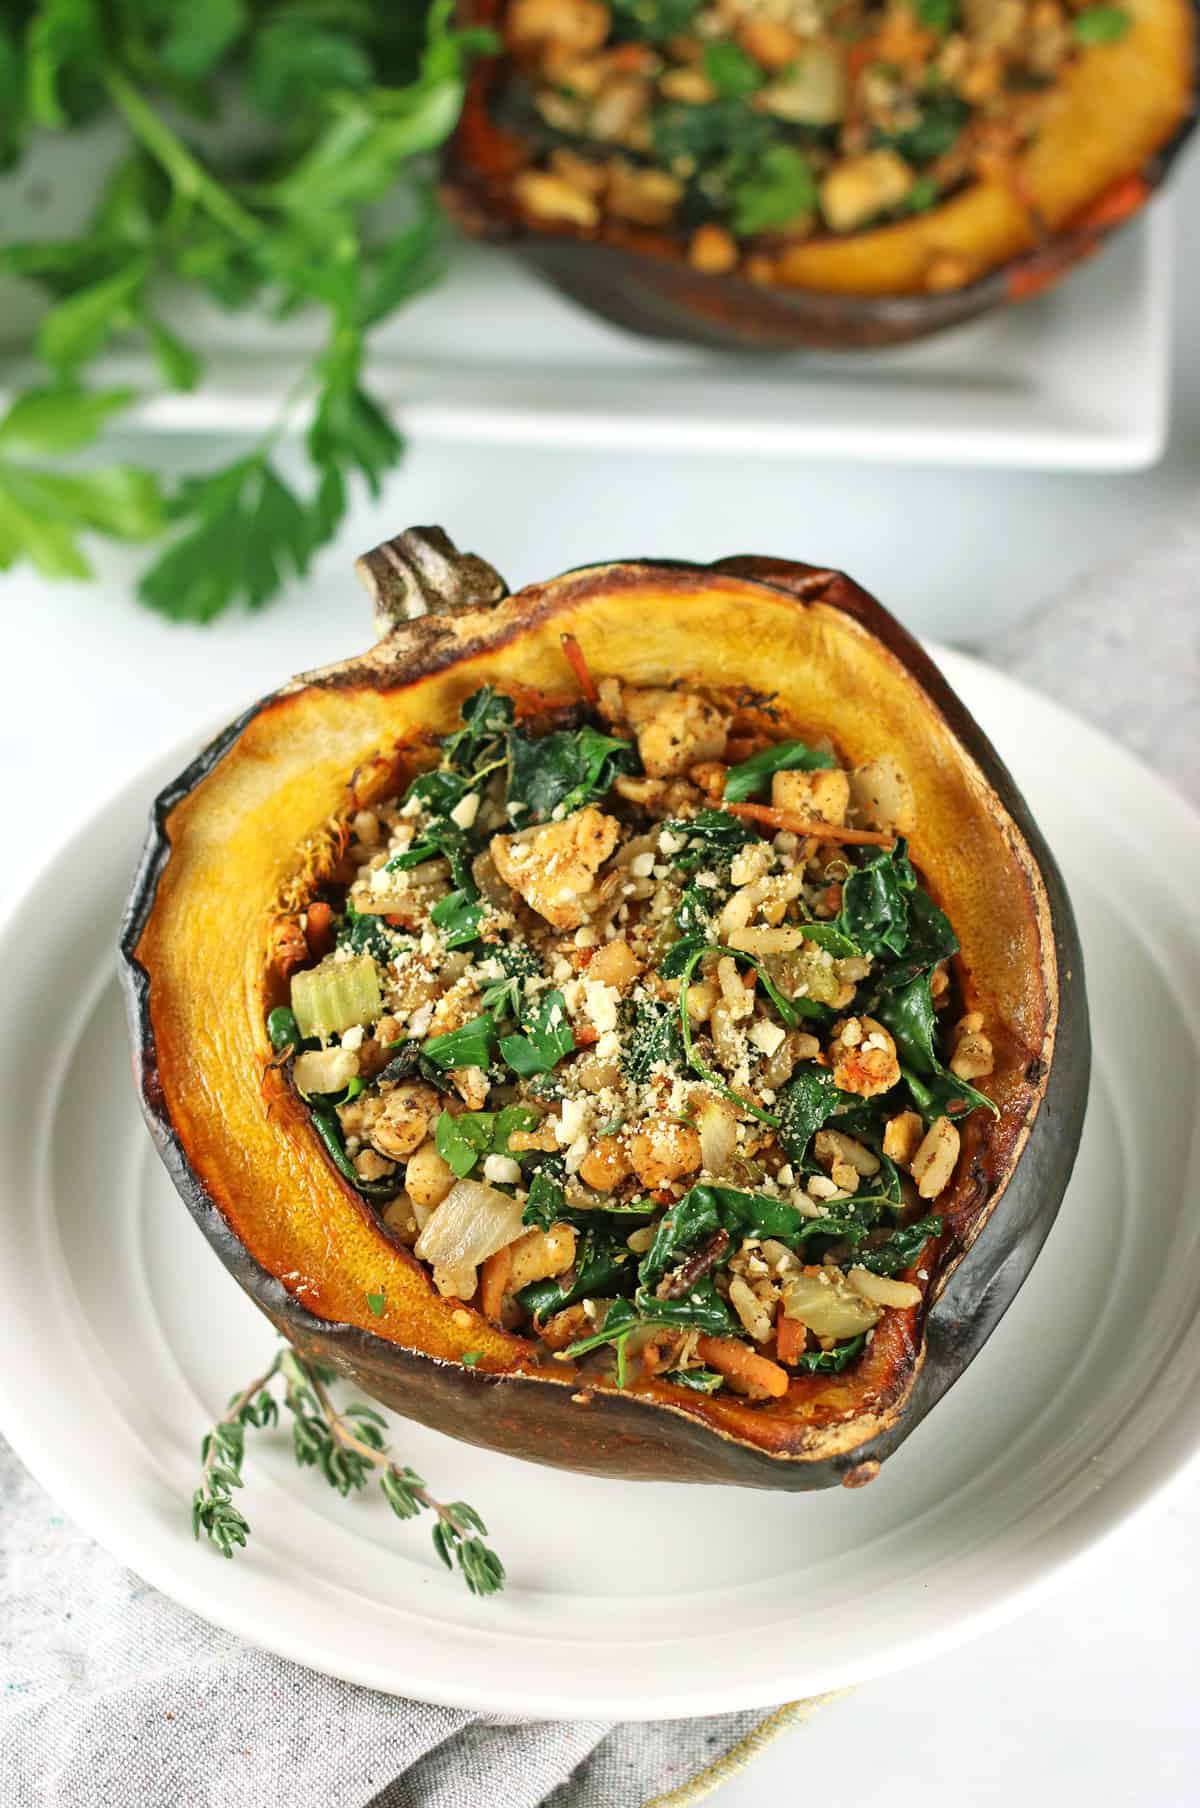 acorn squash on plate with thyme sprigs.